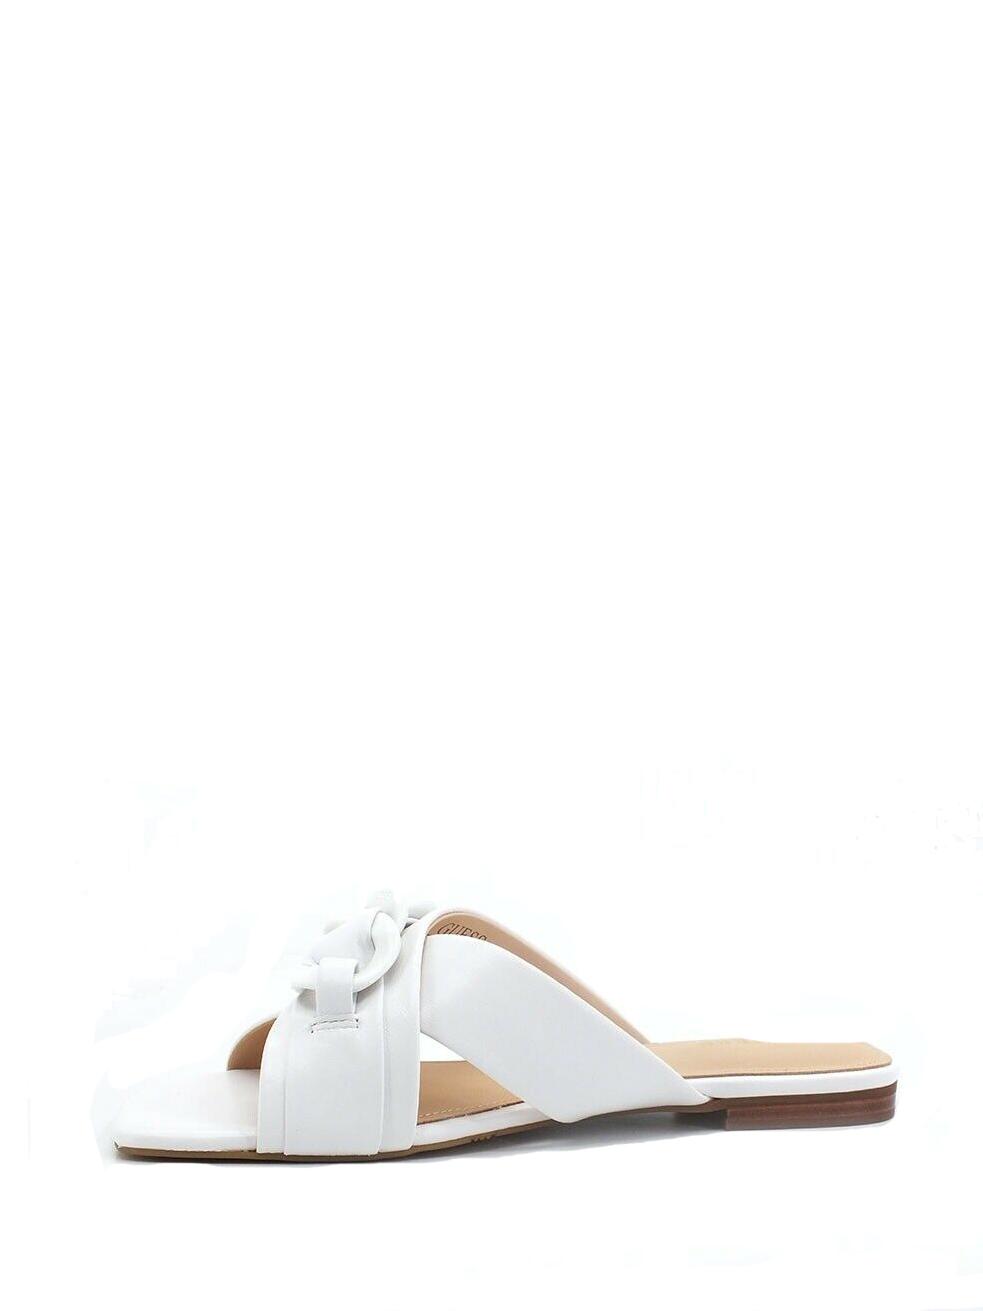 Guess Sameya Leather Sandals White - Buy At Outlet Prices!